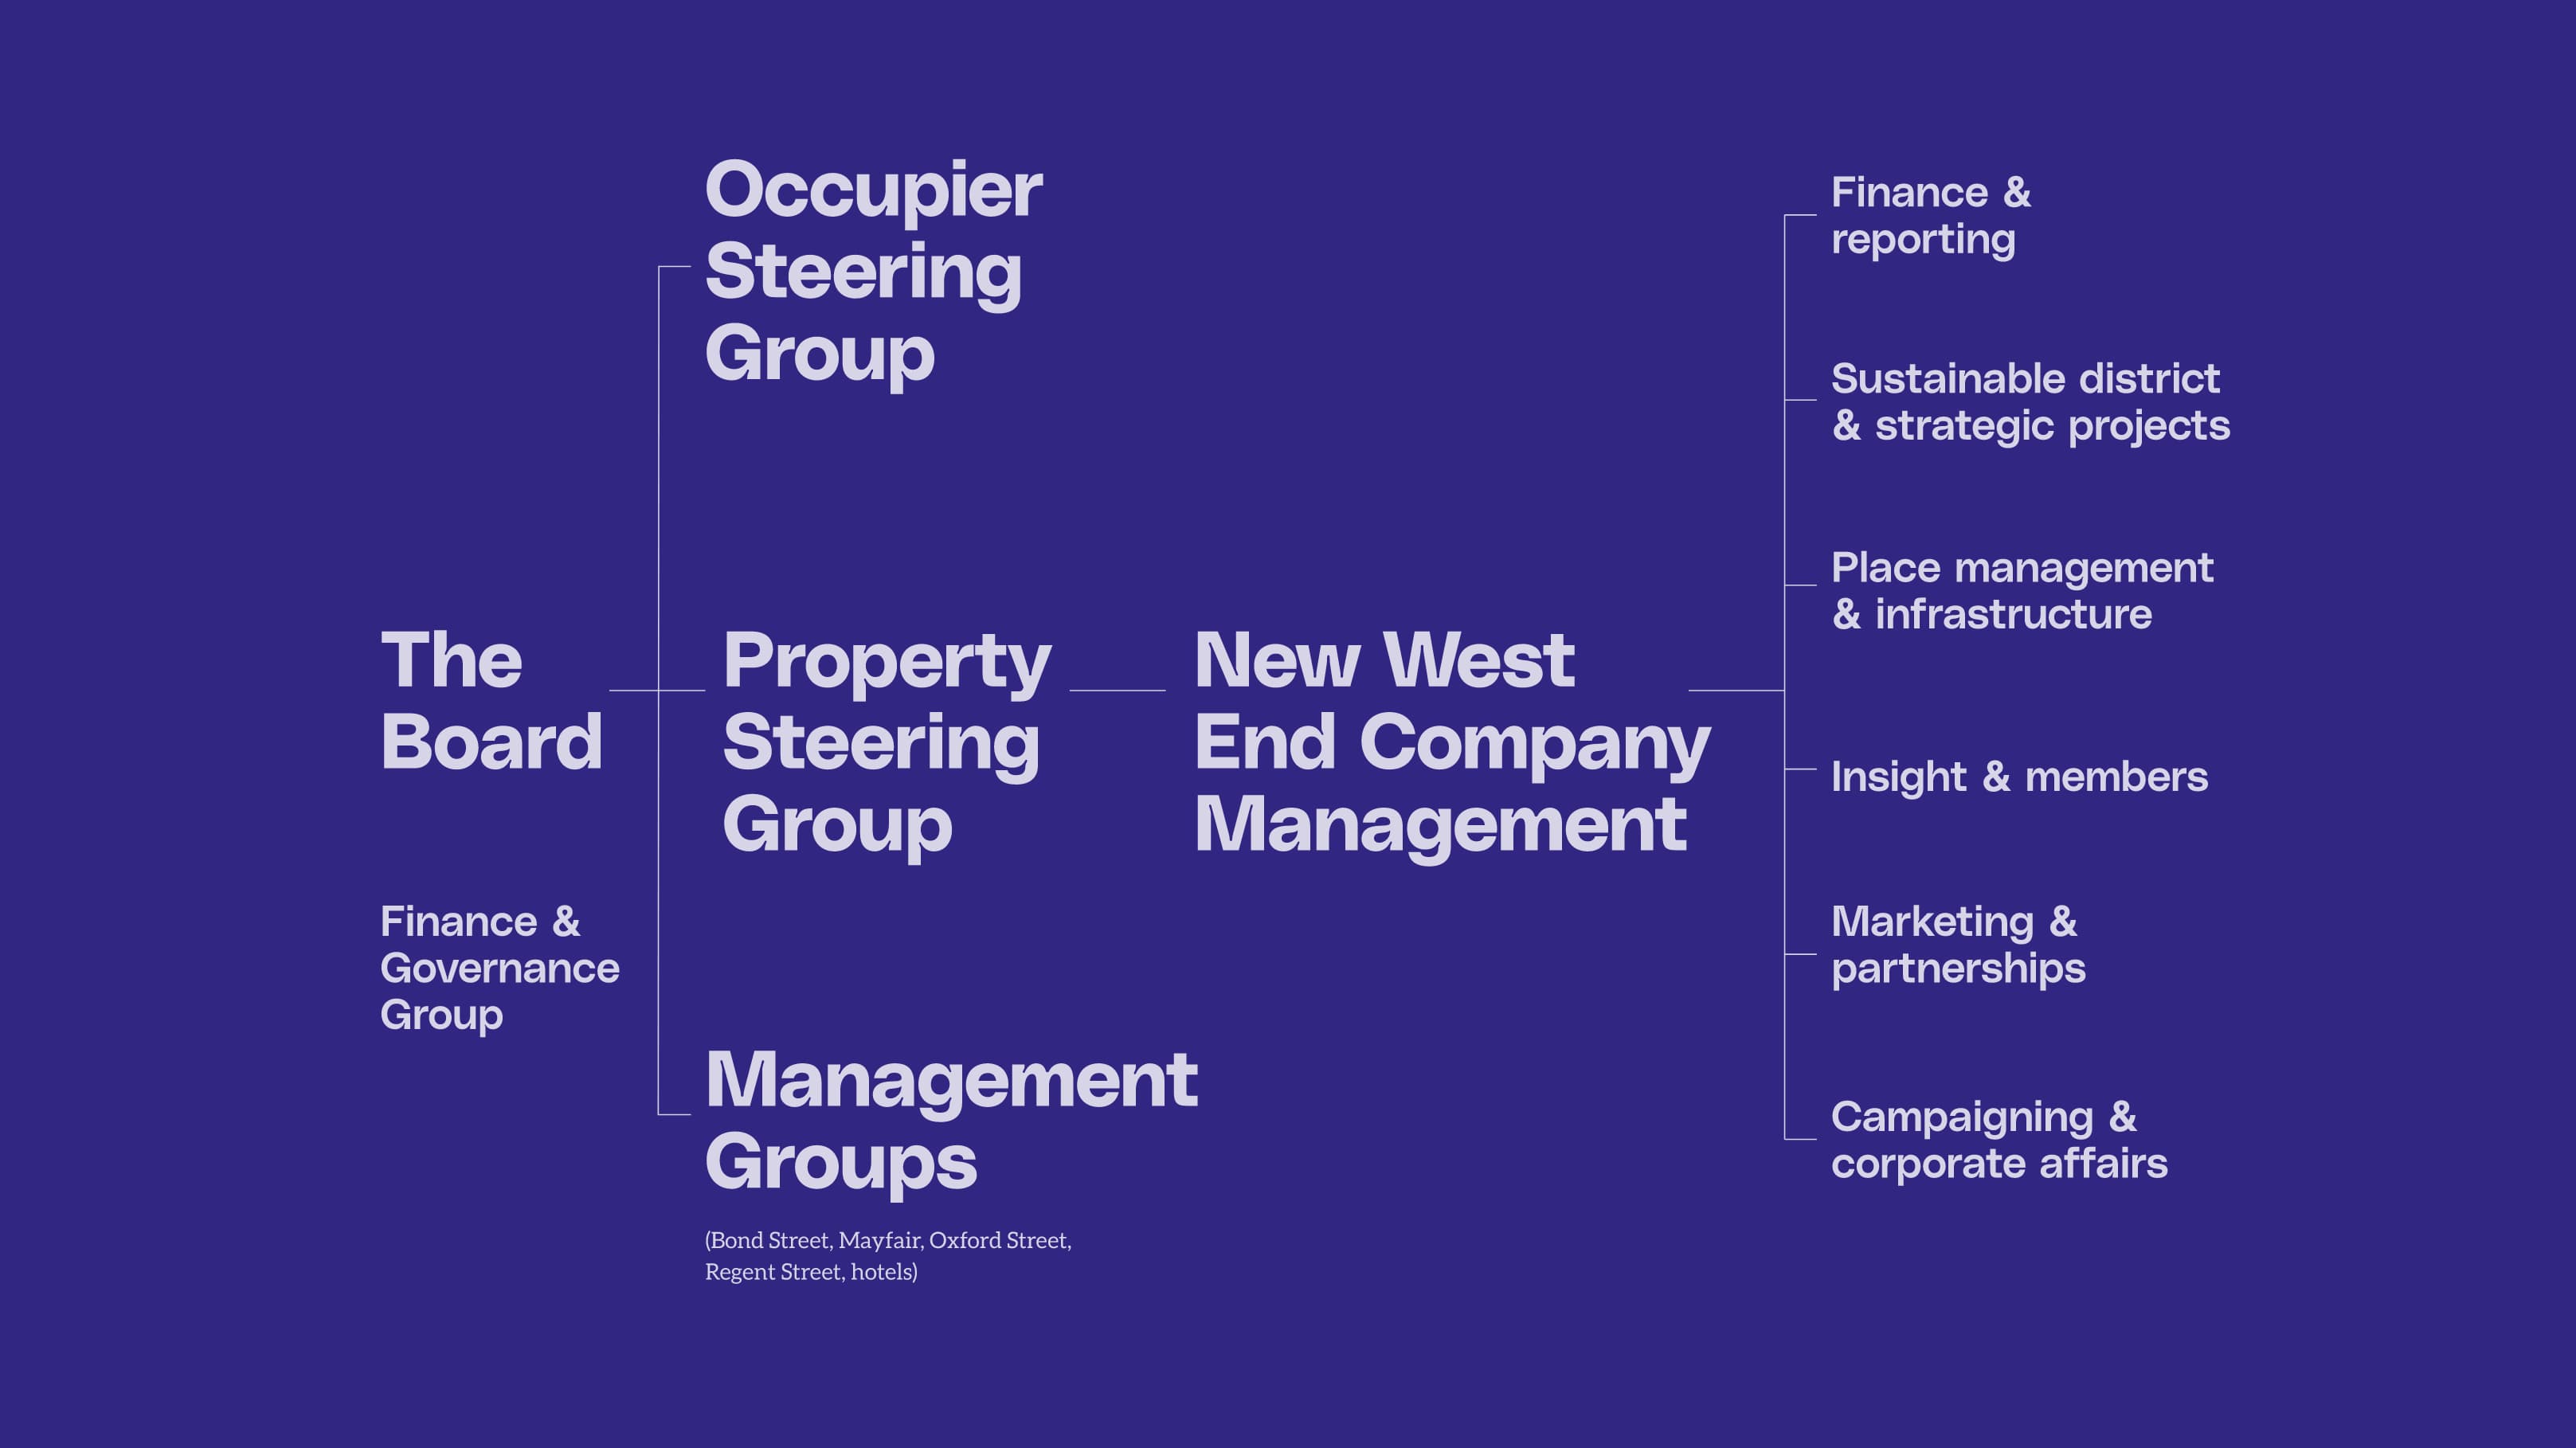 New West End Company Management